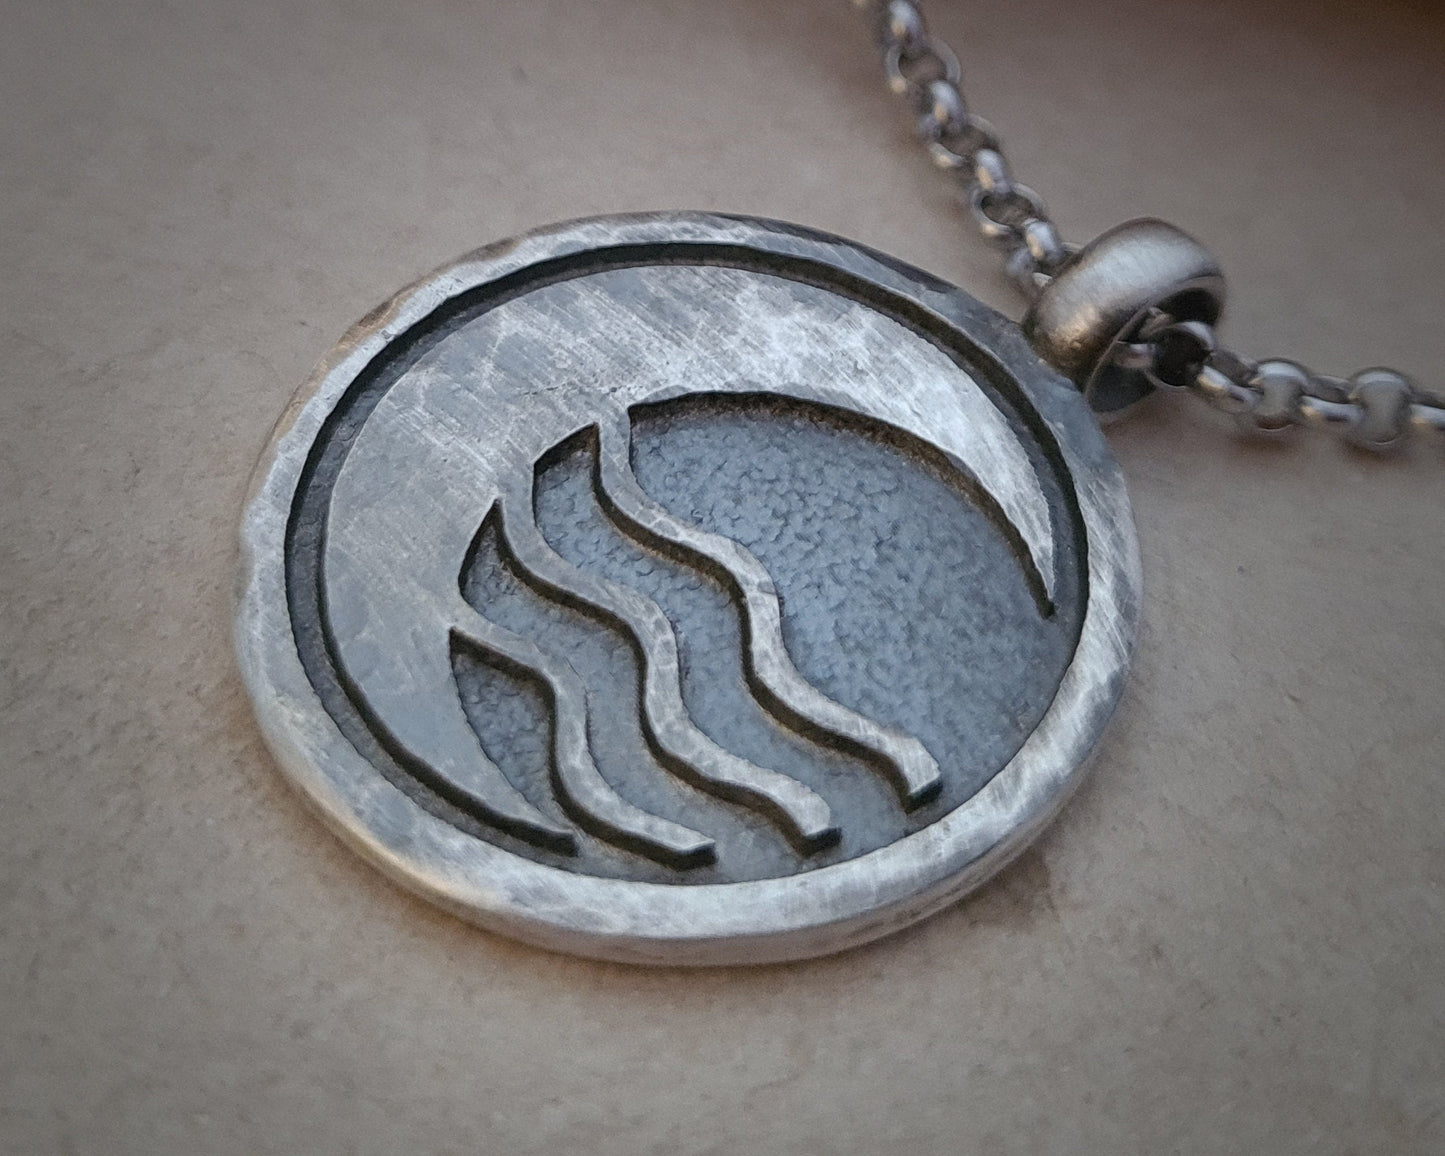 925 Sterling Silver Avatar Last Airbender Northern Water Tribe Nation Necklace Pendant - Baldur Jewelry